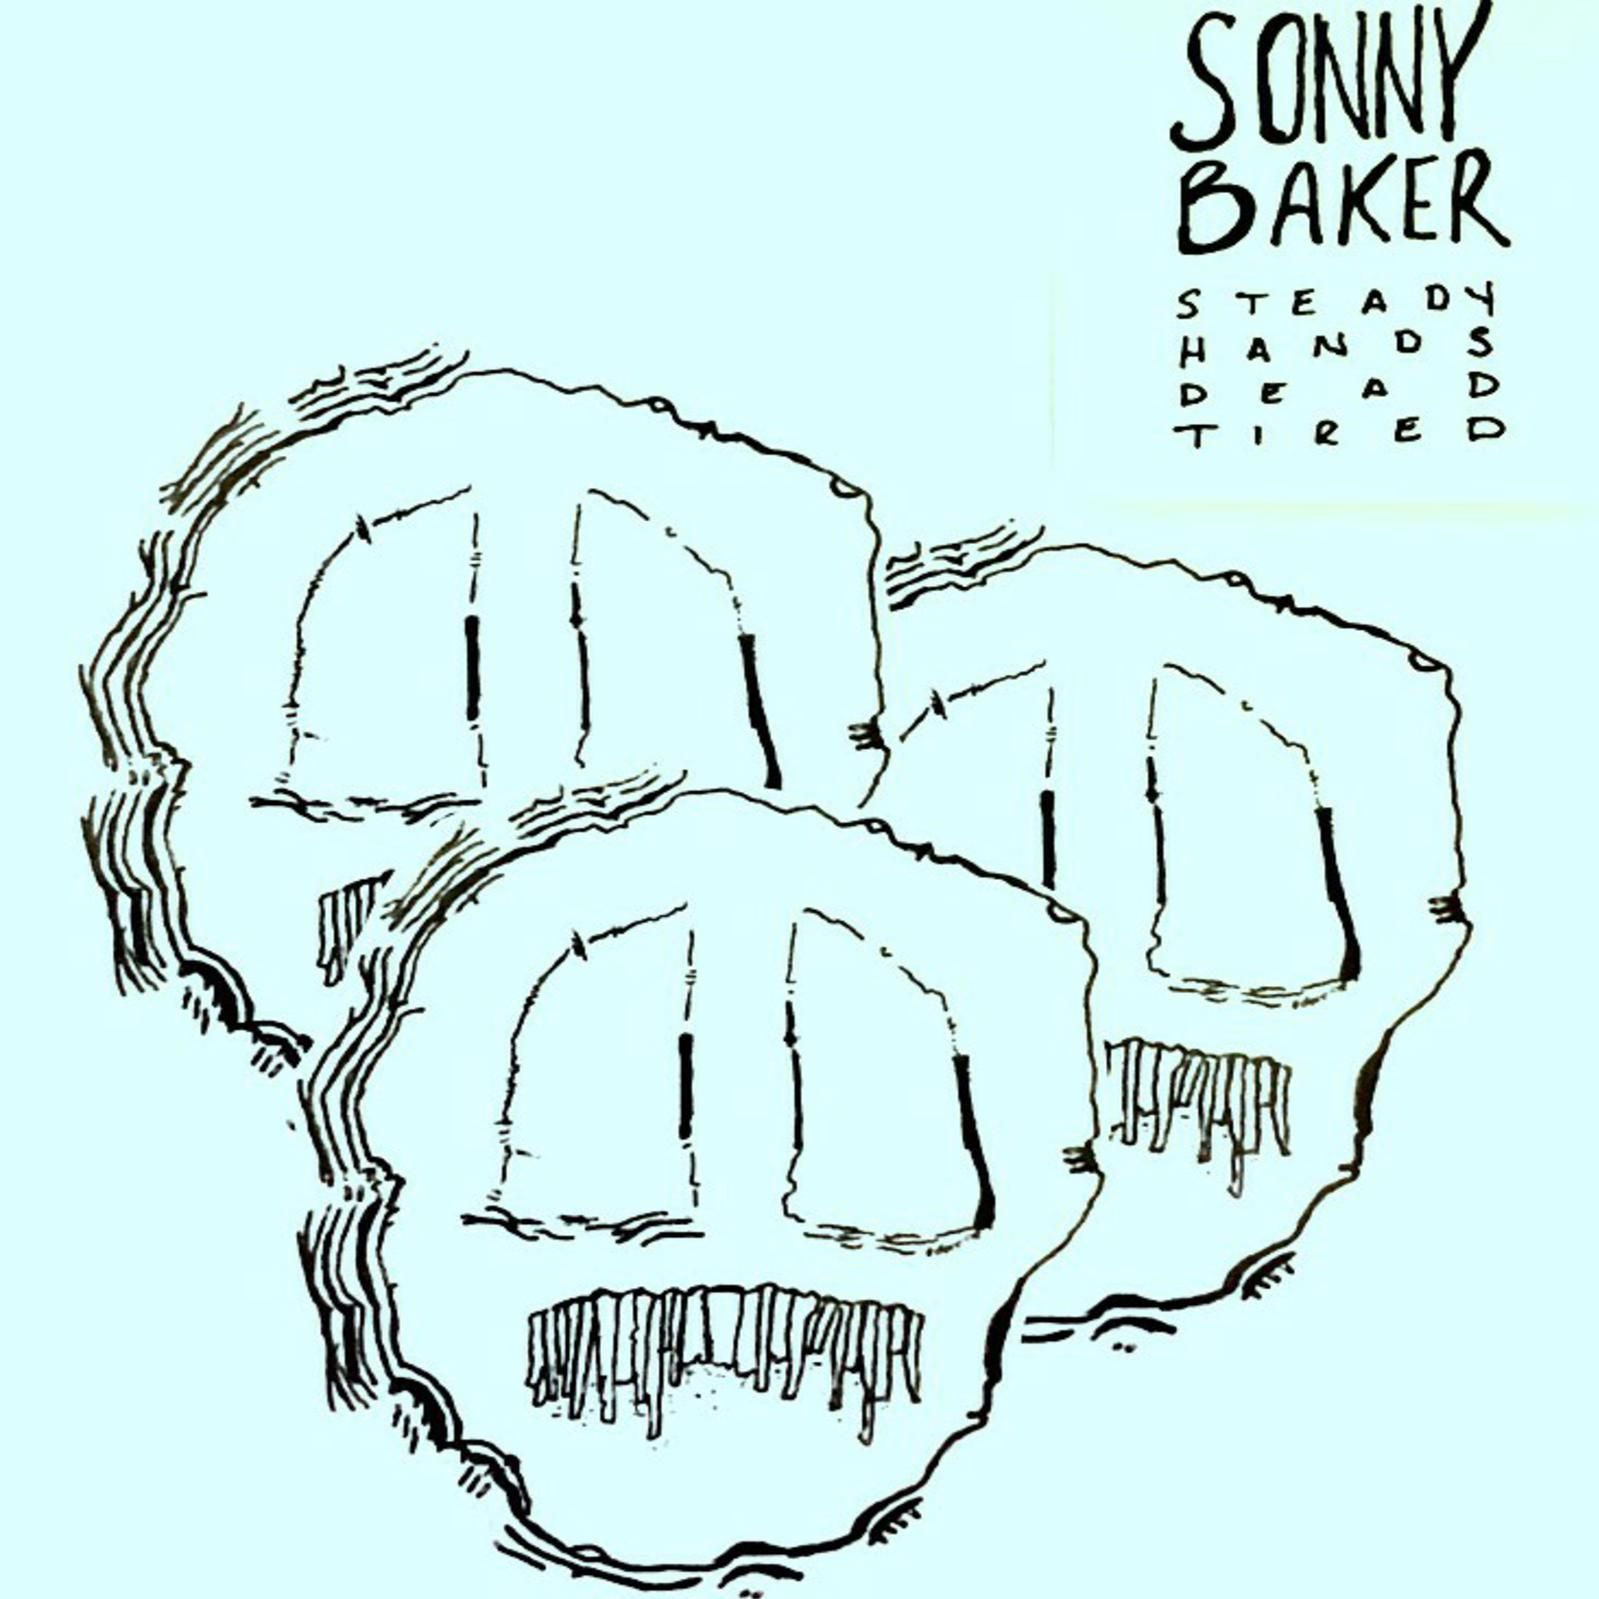 Sonny Baker Returns with “Reluctant Thief”